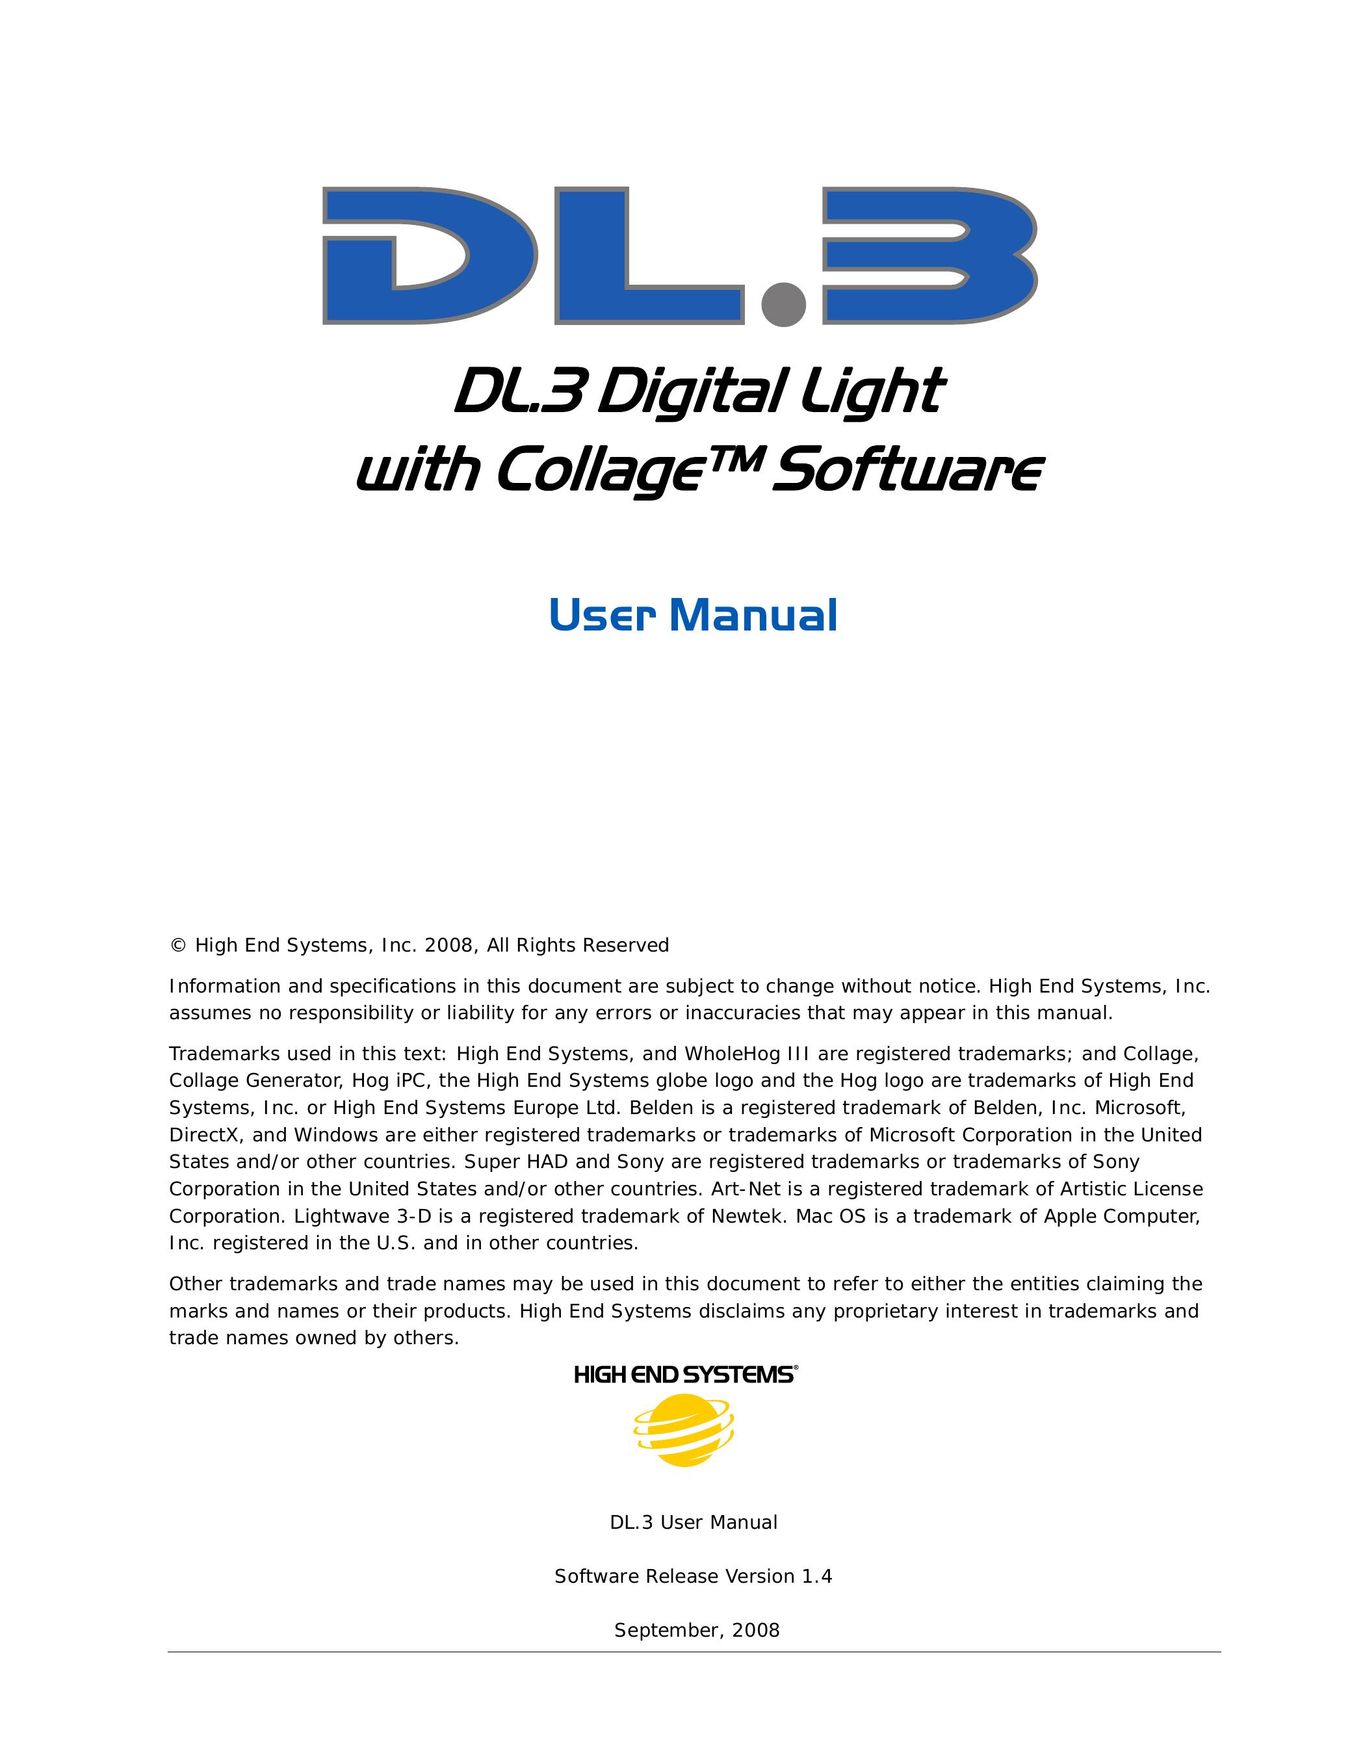 High End Systems DL.3 Work Light User Manual